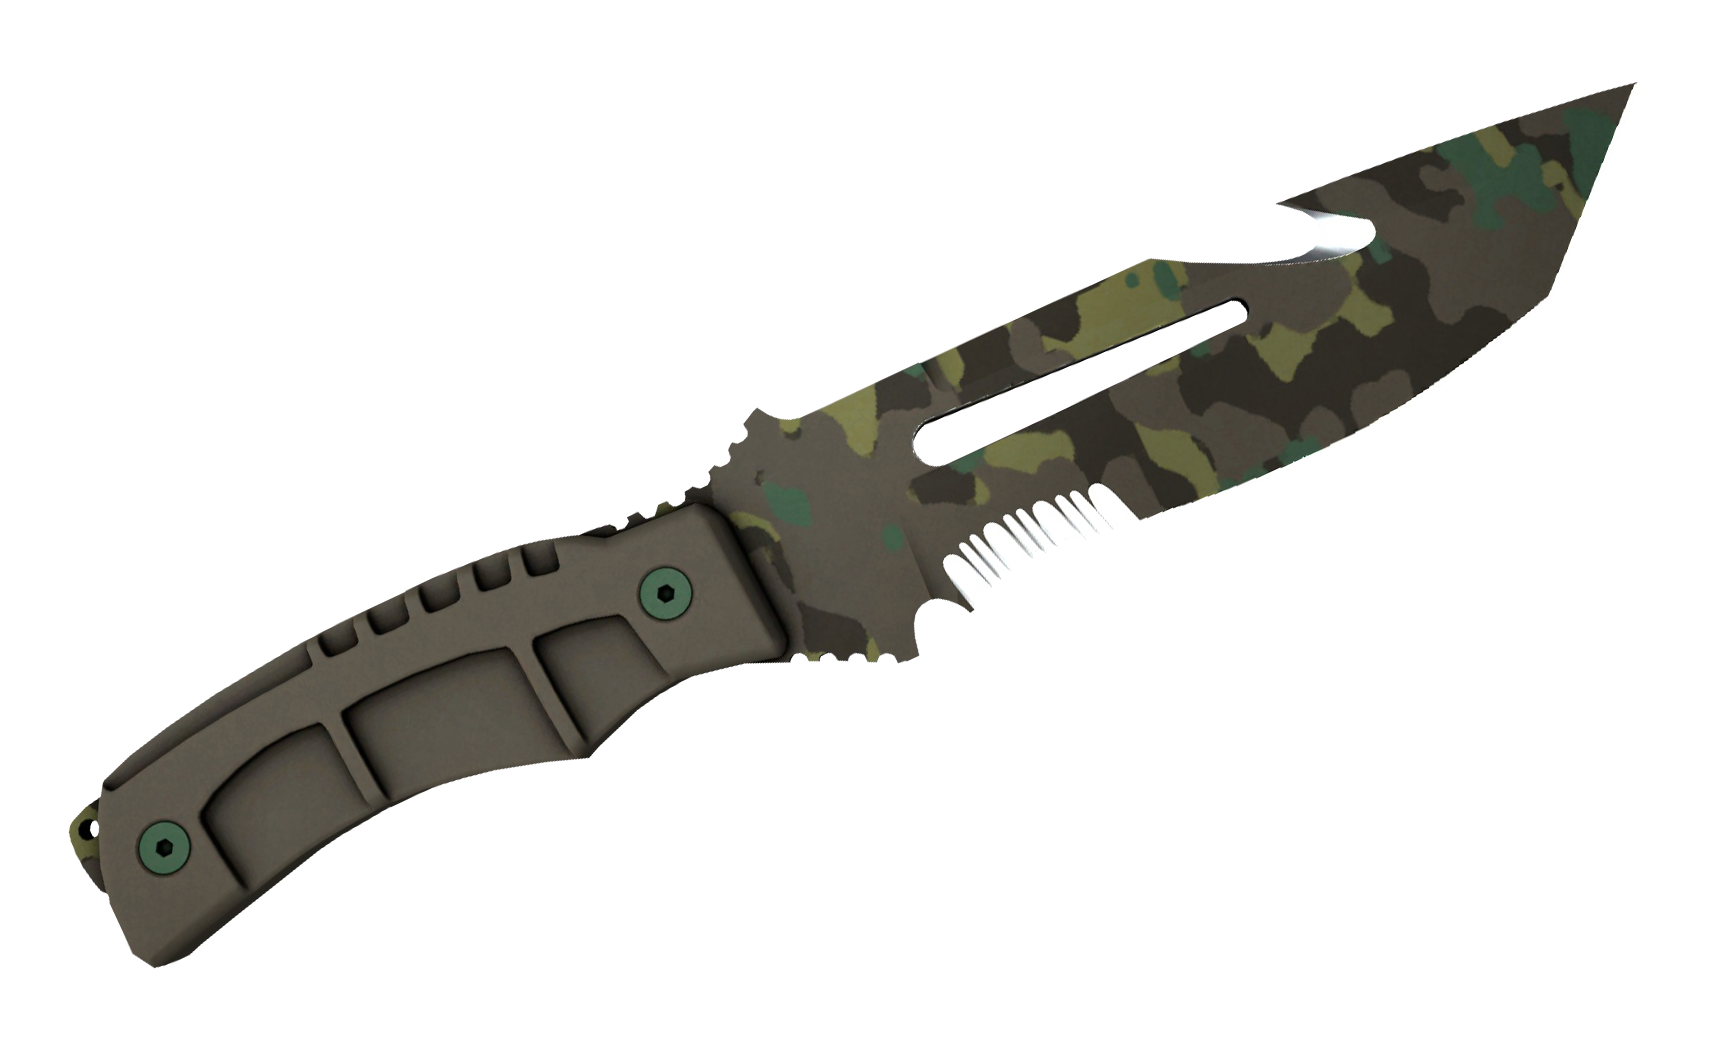 for mac download M4A1-S Boreal Forest cs go skin